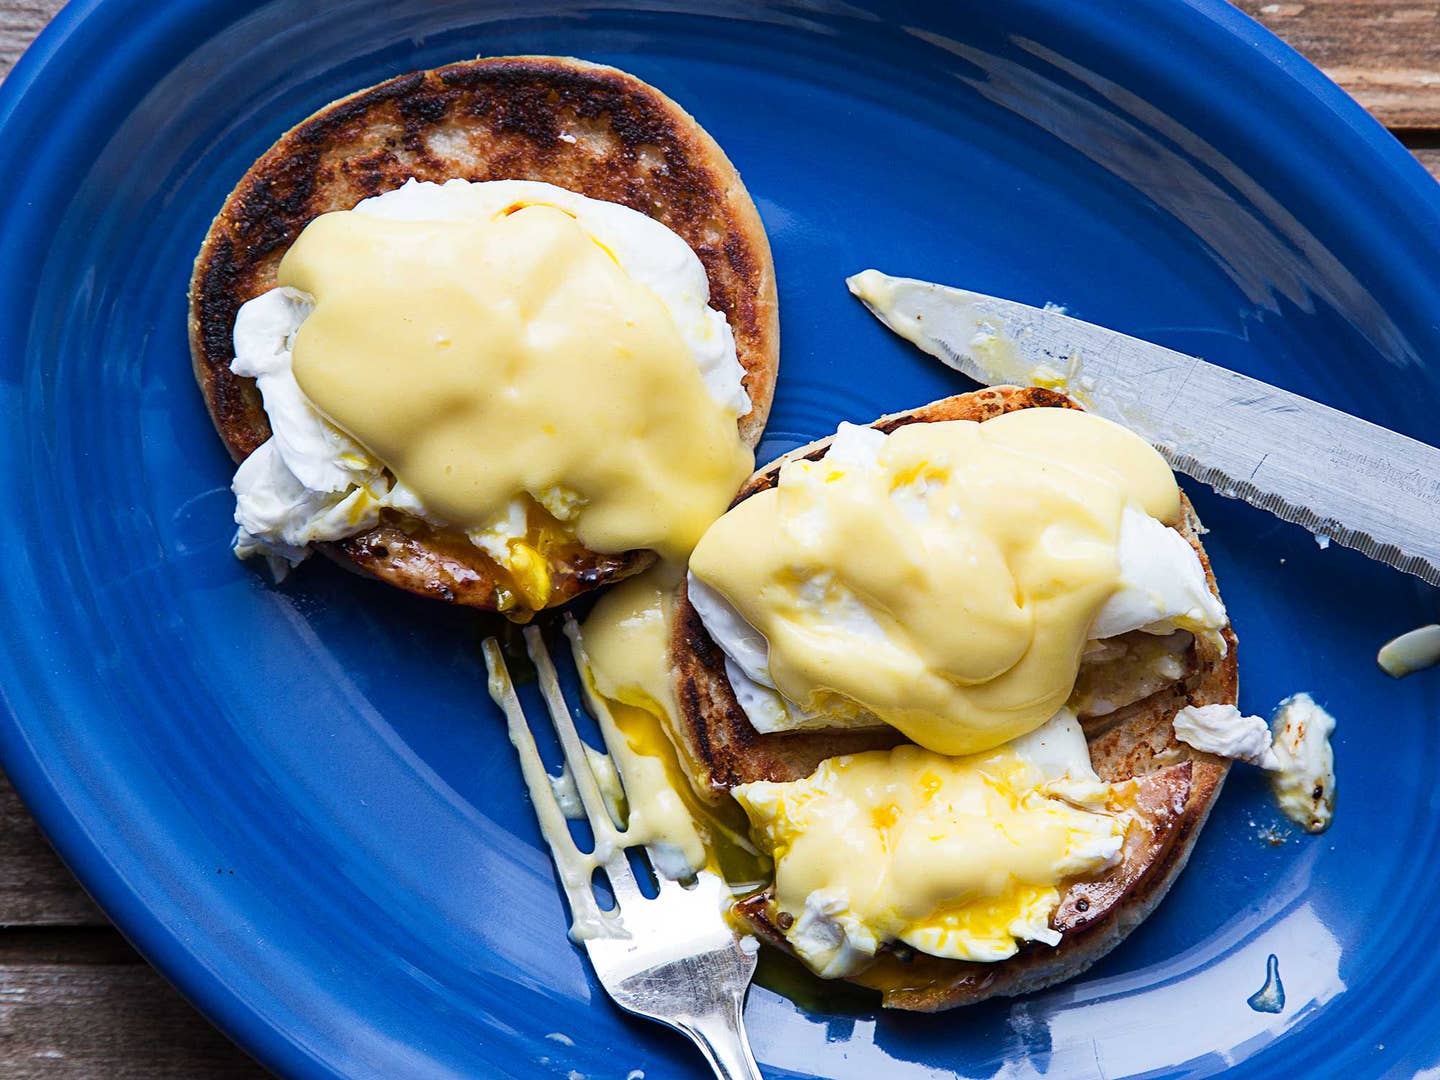 16 Breakfasts to Make for Christmas Morning